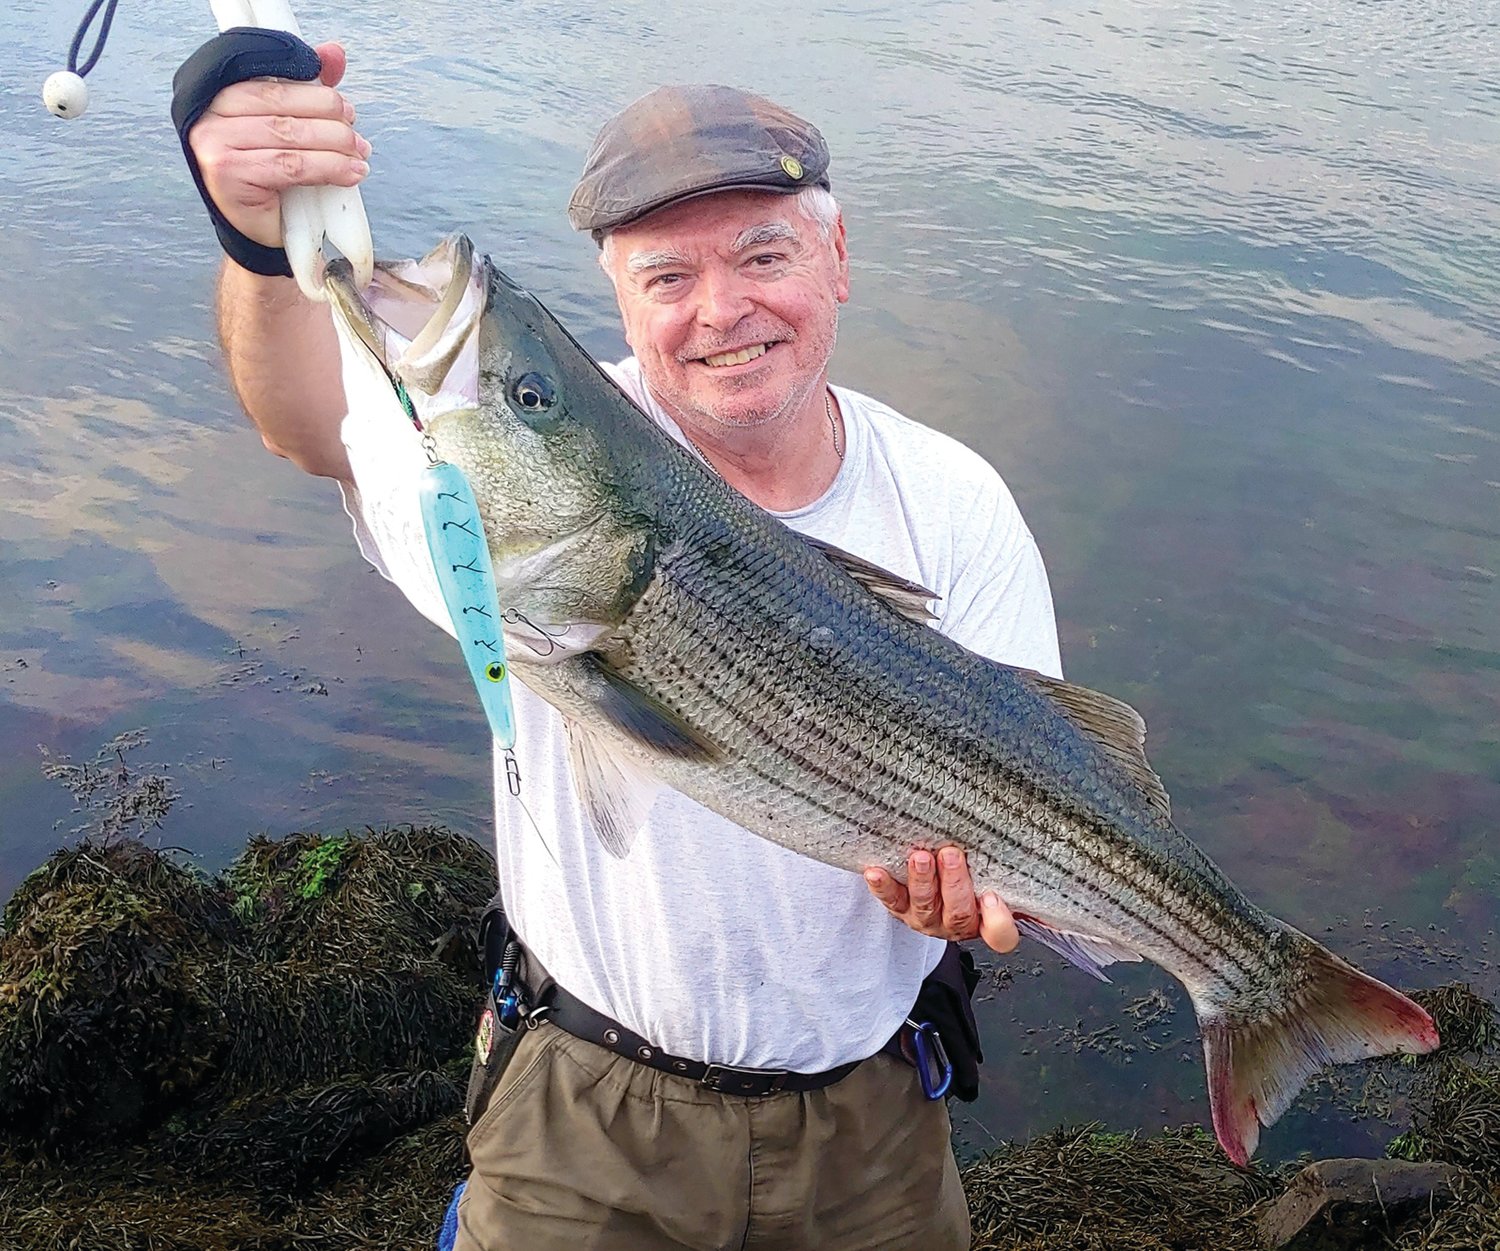 Striped bass reductions working, need to formalize conservation